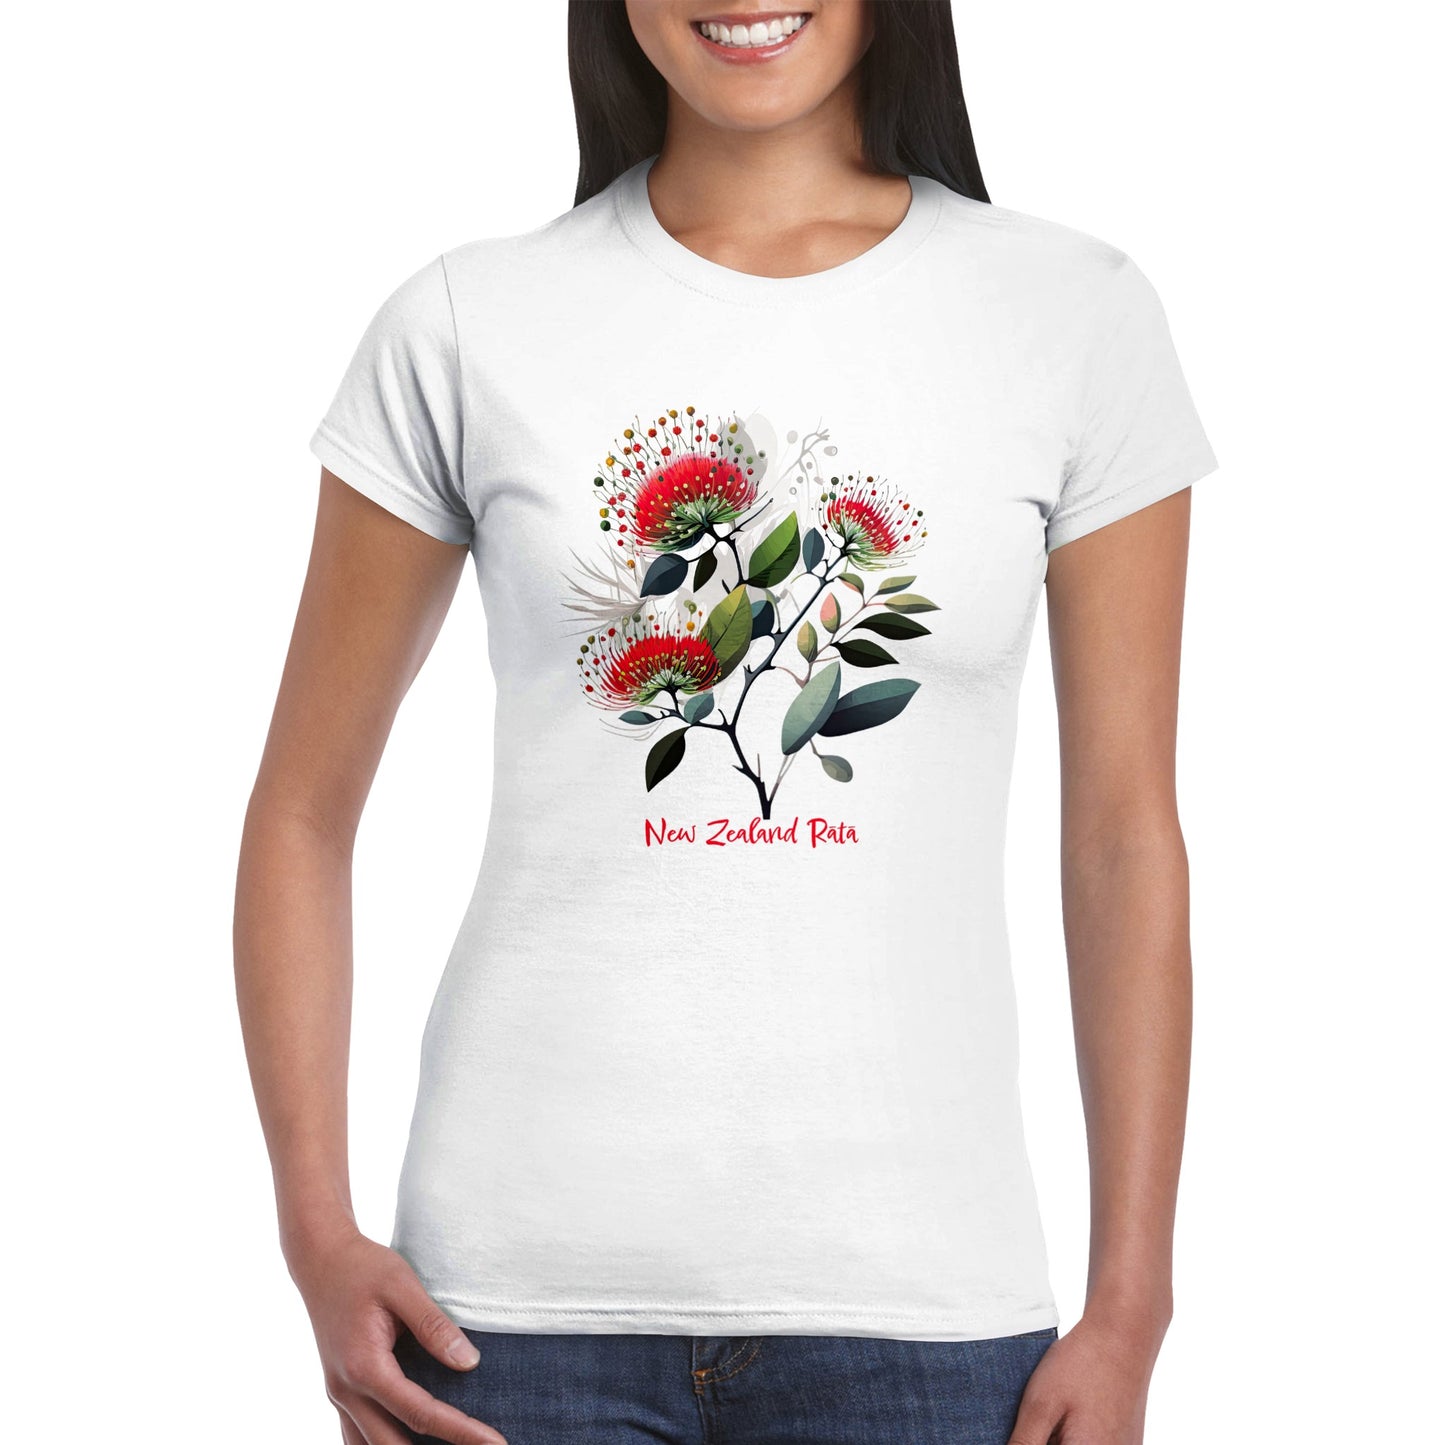 Woman wearing a white t-shirt with a new zealand rata flower print